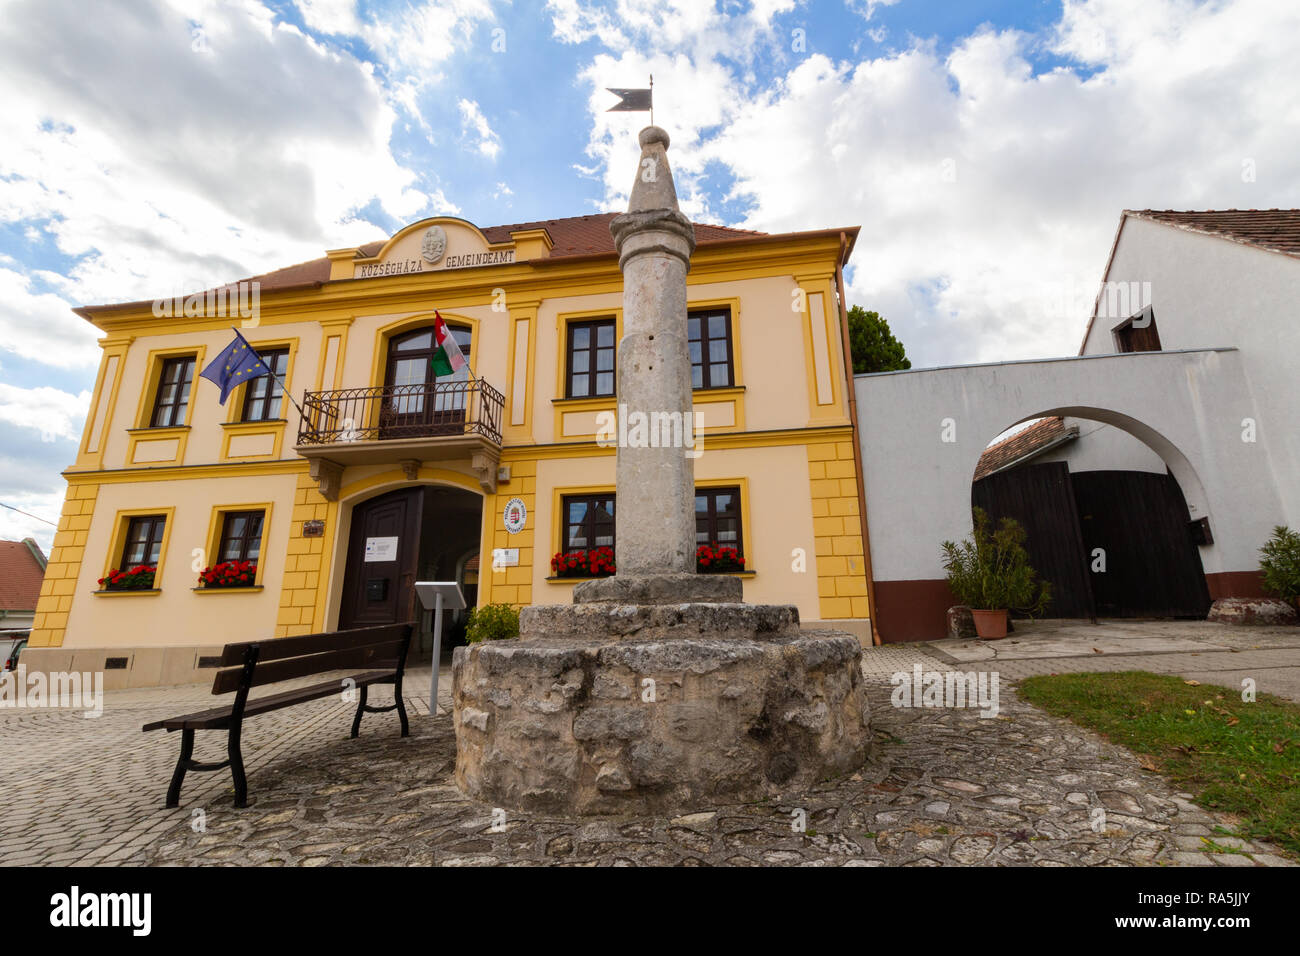 The Mayor`s office and the only pillory in Hungary located in its original Medieval place, in Fertorakos, Hungary Stock Photo